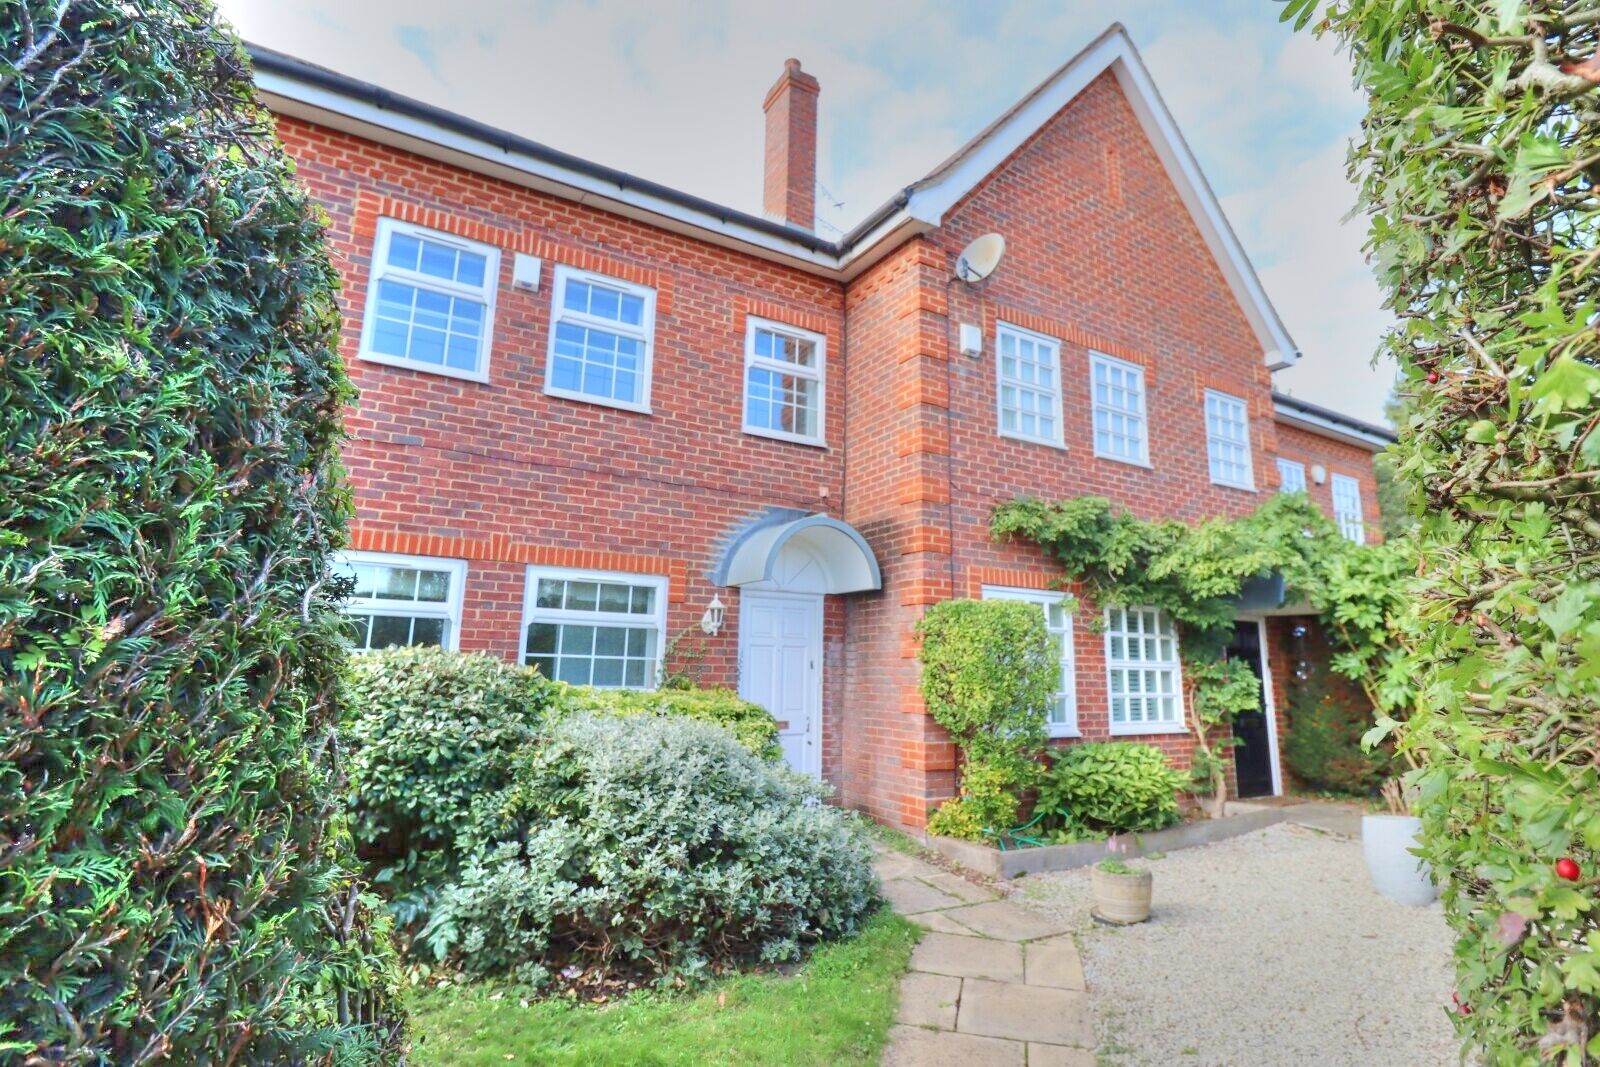 4 bedroom semi detached house to rent, Available now Oxford Road, Gerrards Cross, SL9, main image